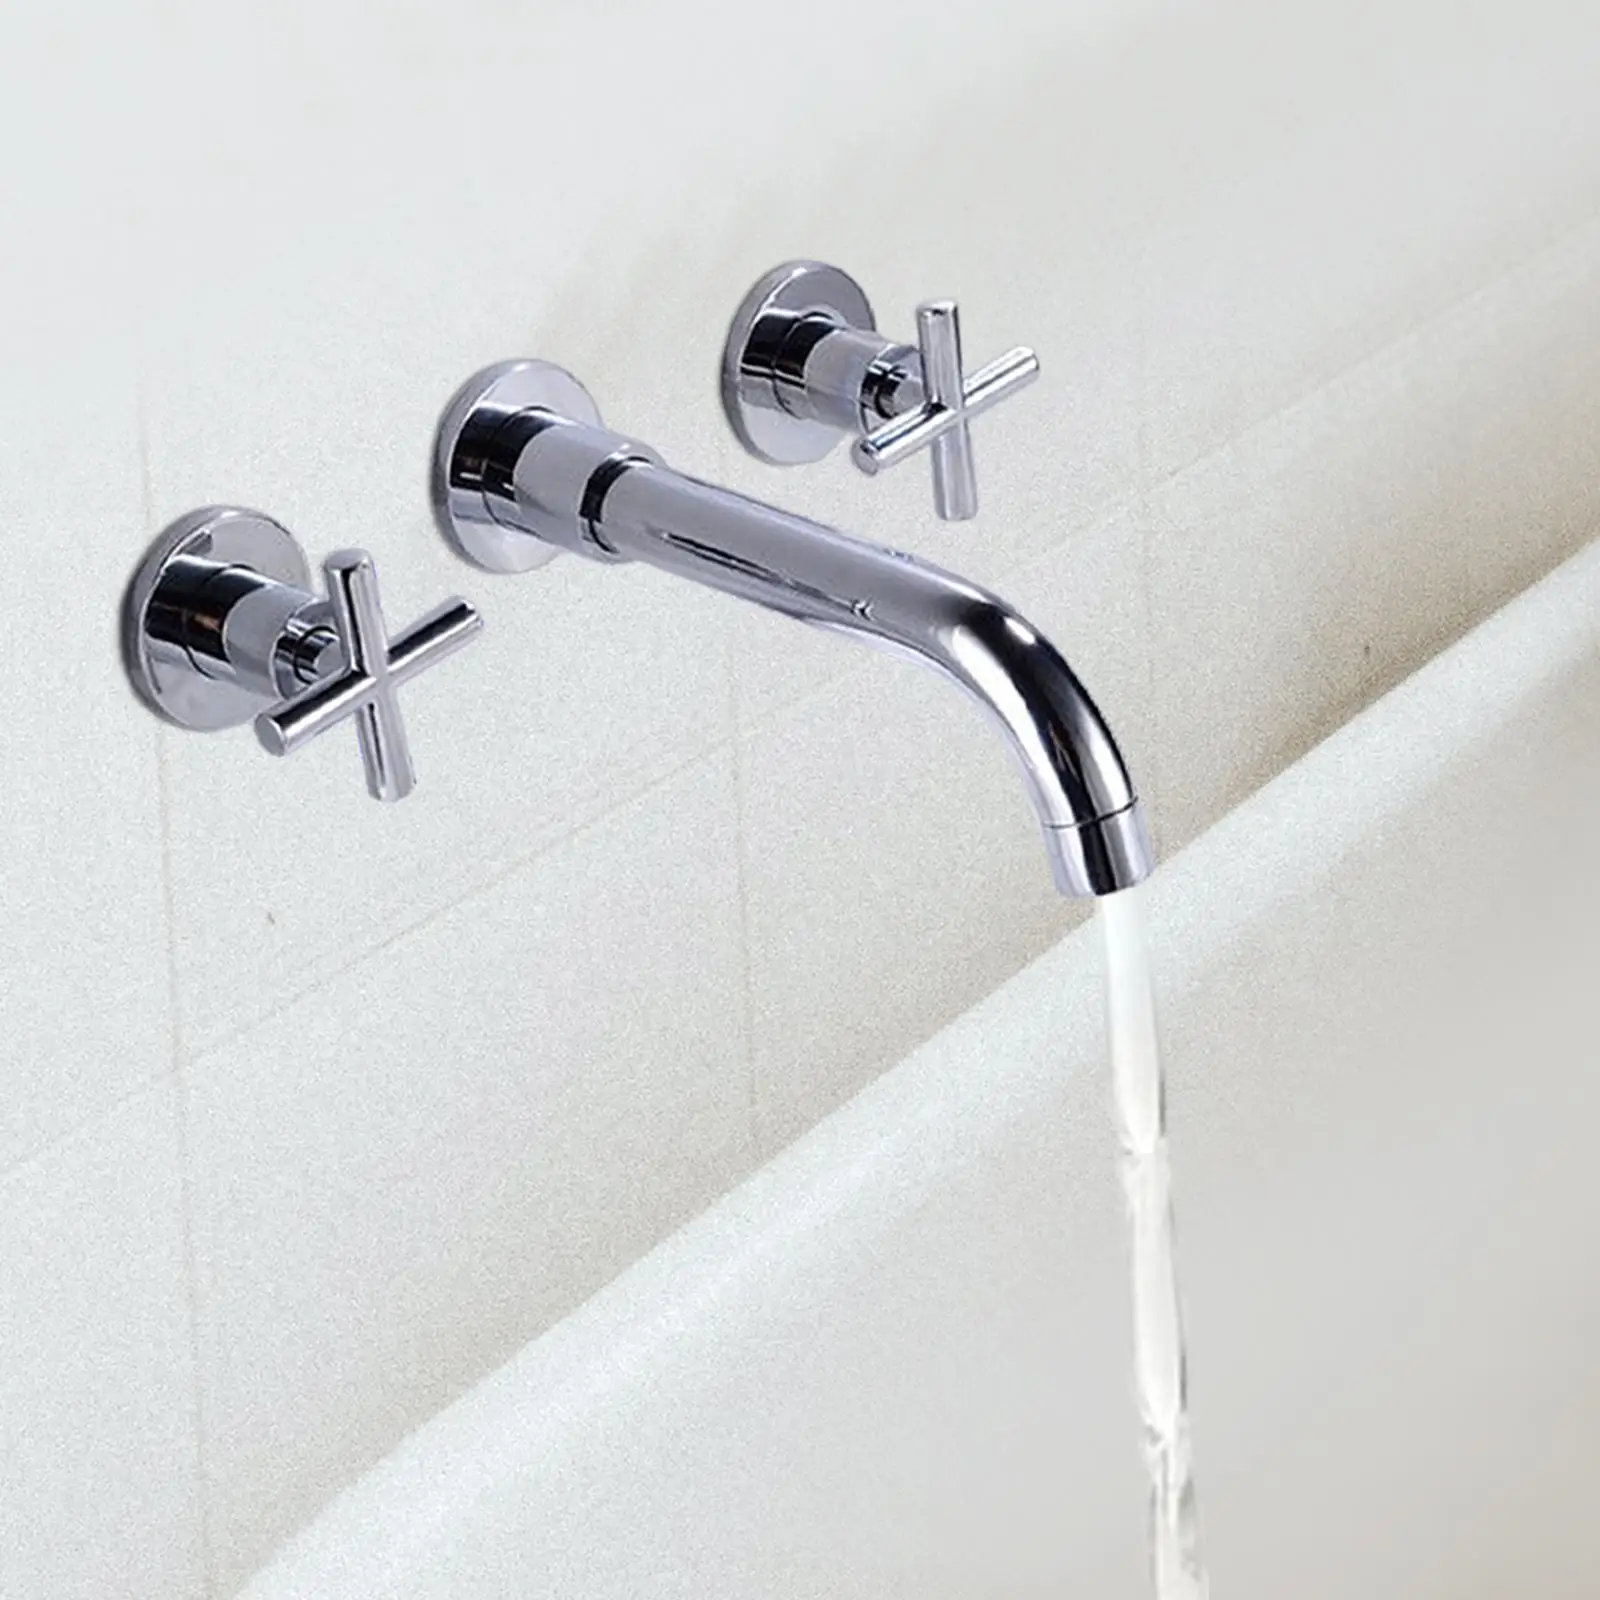 Wall Mounted Sink Tap Swivel Spout Double Cross Handles Kitchen Mixer Tap Bathroom Basin Sink Faucet for Laundry Kitchen Bathtub